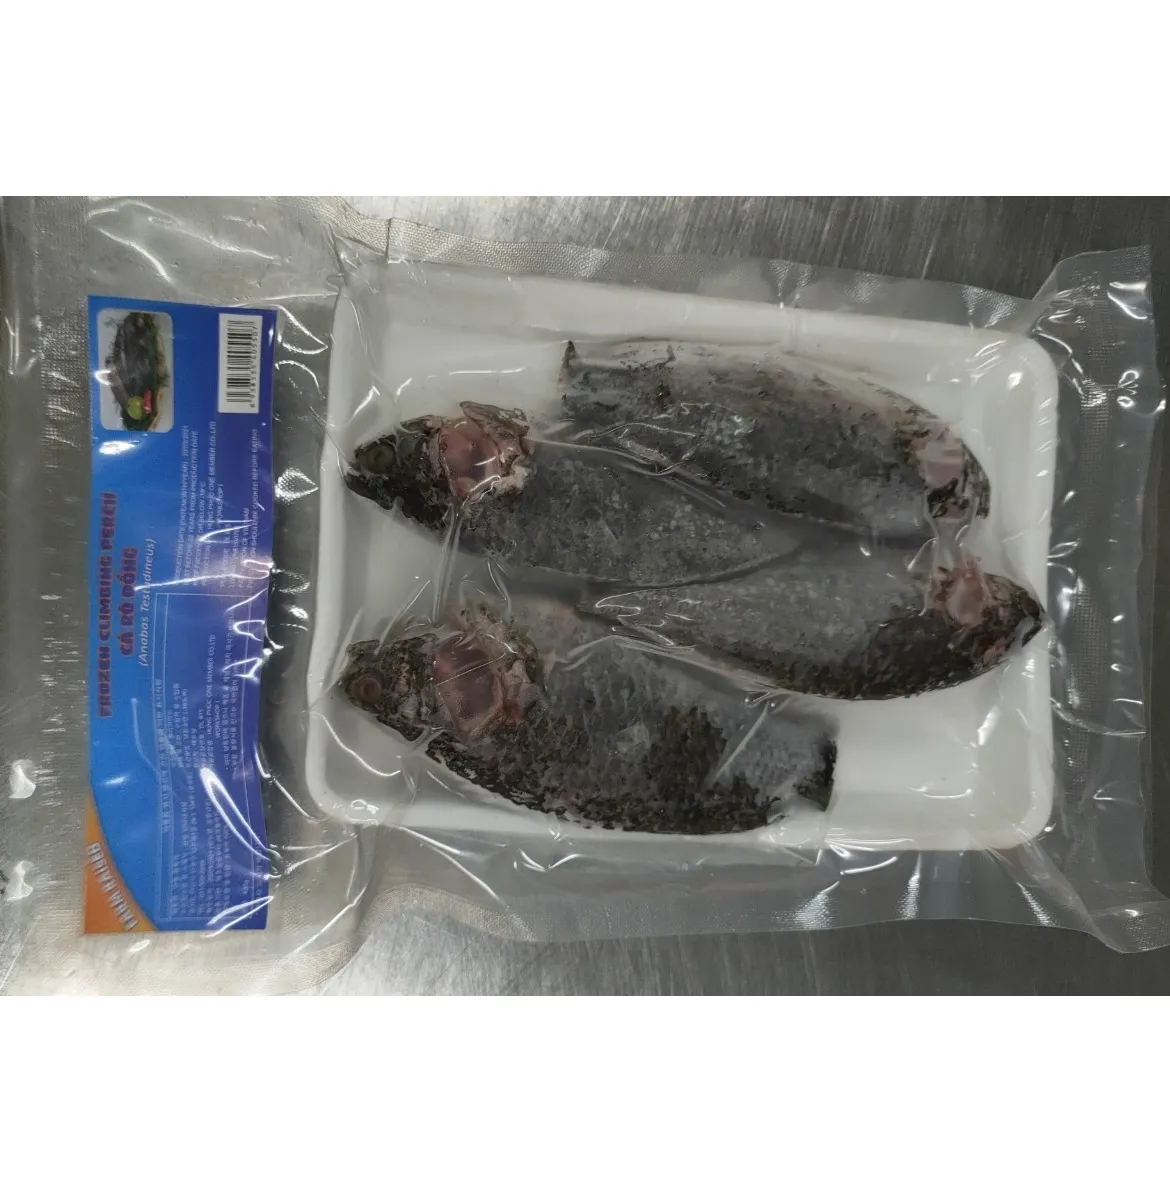 Food Frozen Whole Round Black Tilapia Fish 500800 Gms Gutted Scaled Ggs Tilapia In Competitive Price